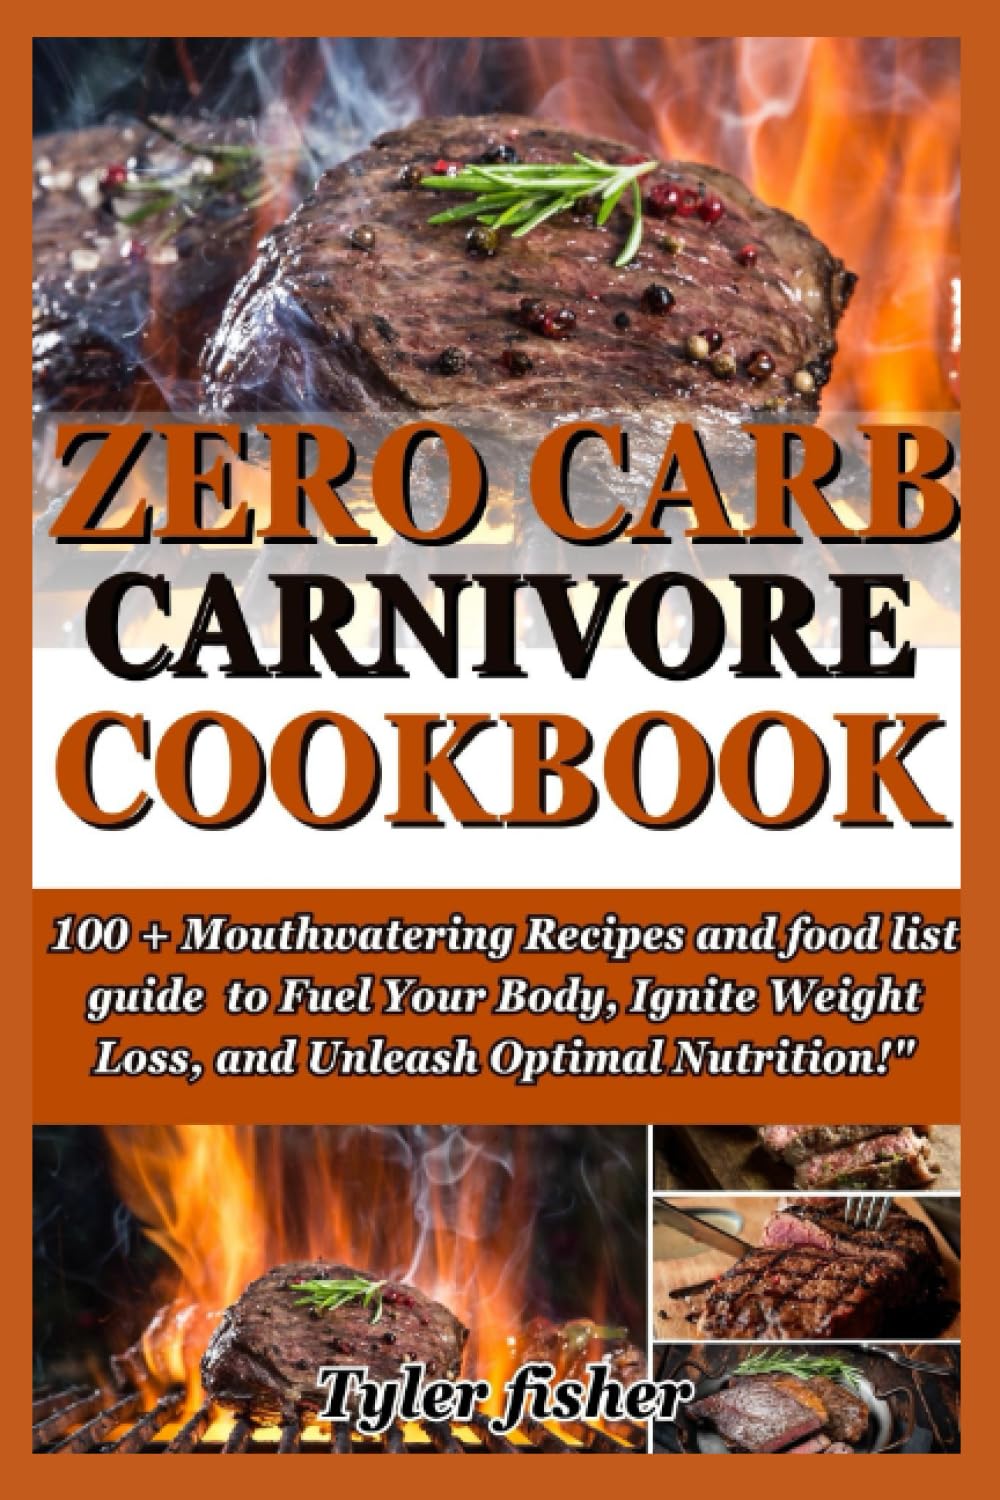 ZERO CARB CARNIVORE DIET COOKBOOK: 100 + Mouthwatering Recipes and food list guide to Fuel Your Body, Ignite Weight Loss, and Unleash Optimal Nutrition!